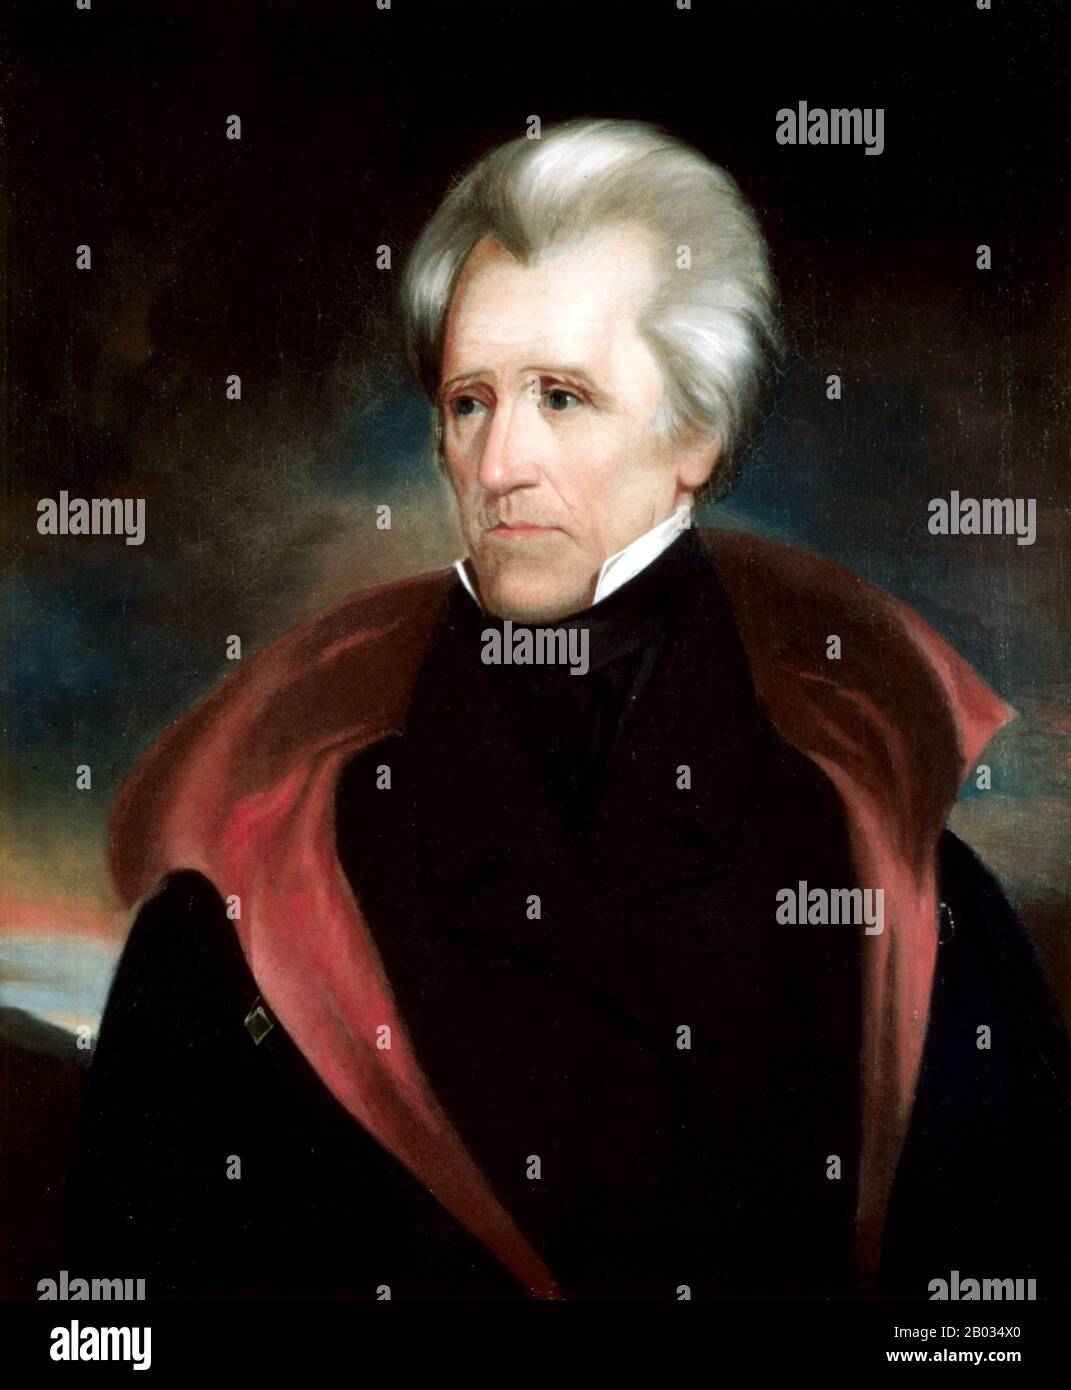 Andrew Jackson (March 15, 1767 – June 8, 1845) was an American statesman who served as the seventh President of the United States from 1829 to 1837. Stock Photo